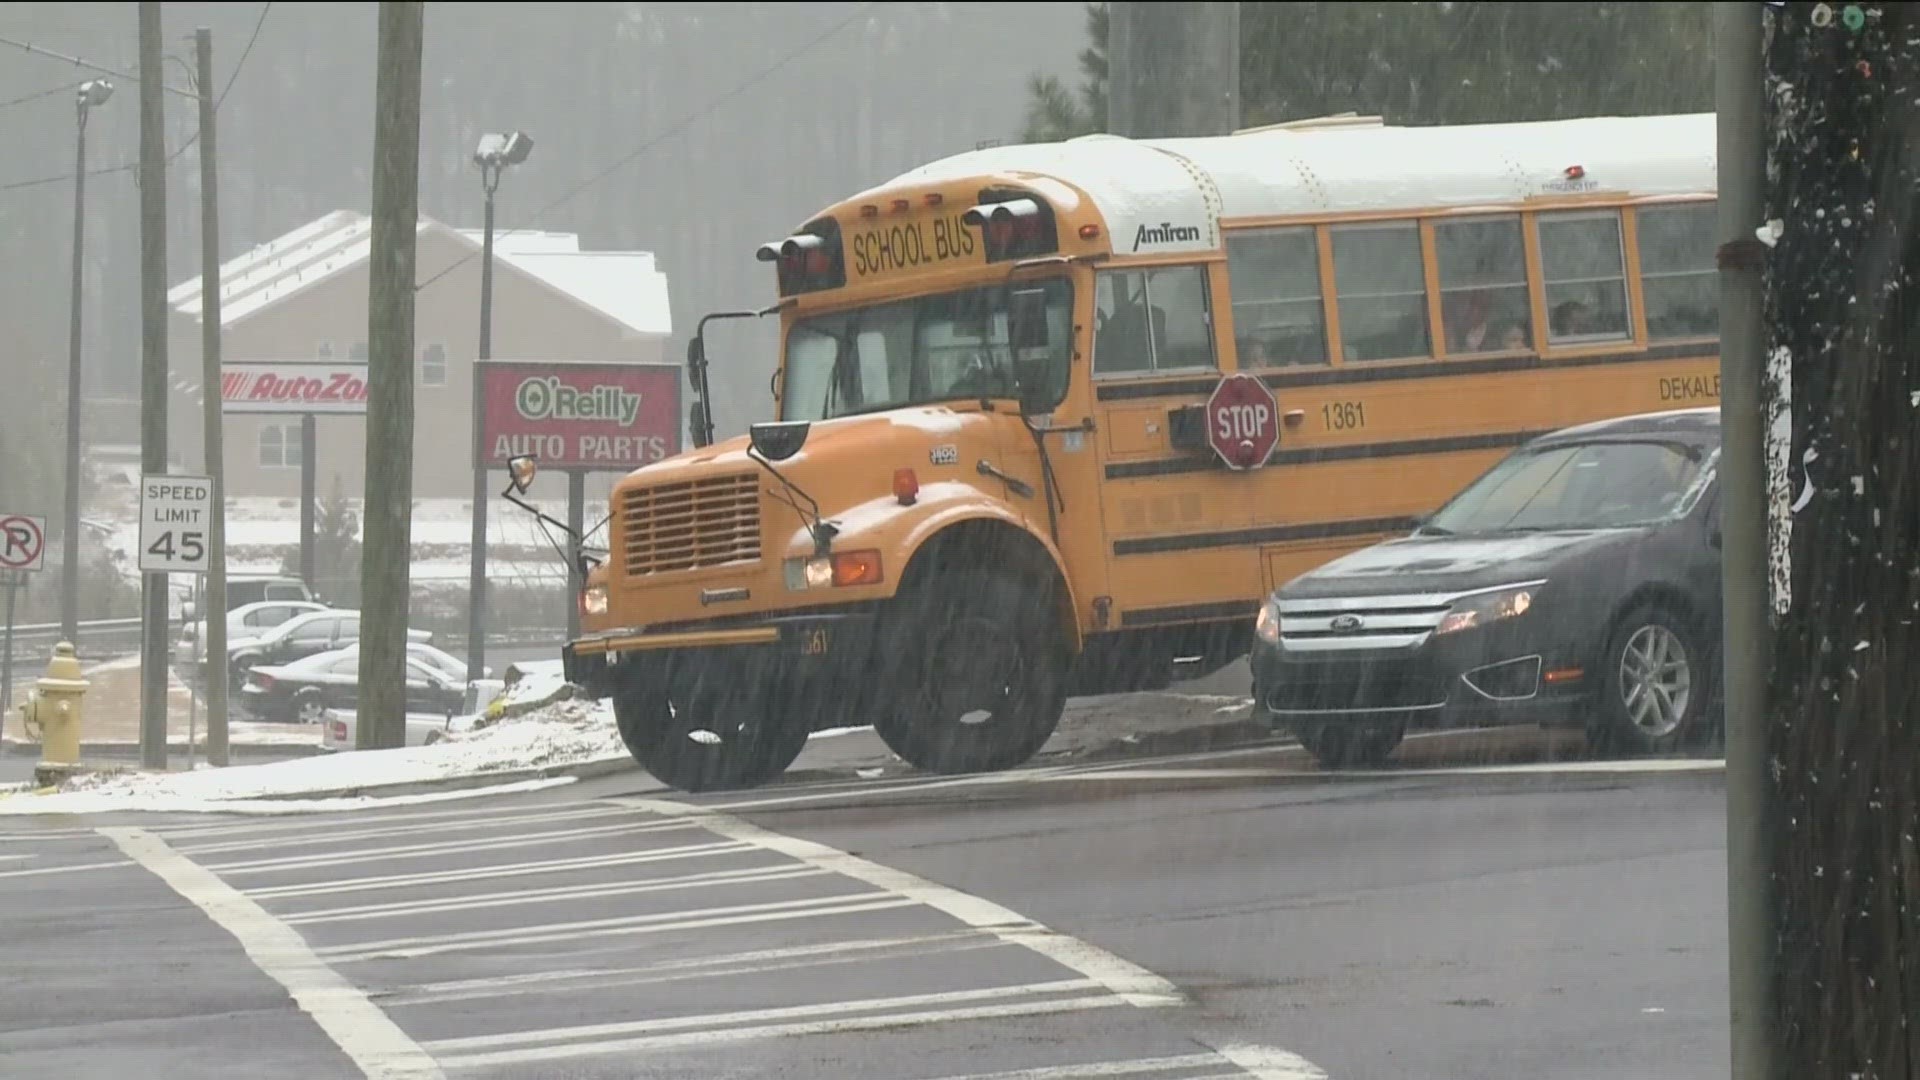 School buses full of kids were stuck on the roads, with some students having to shelter at their schools overnight.